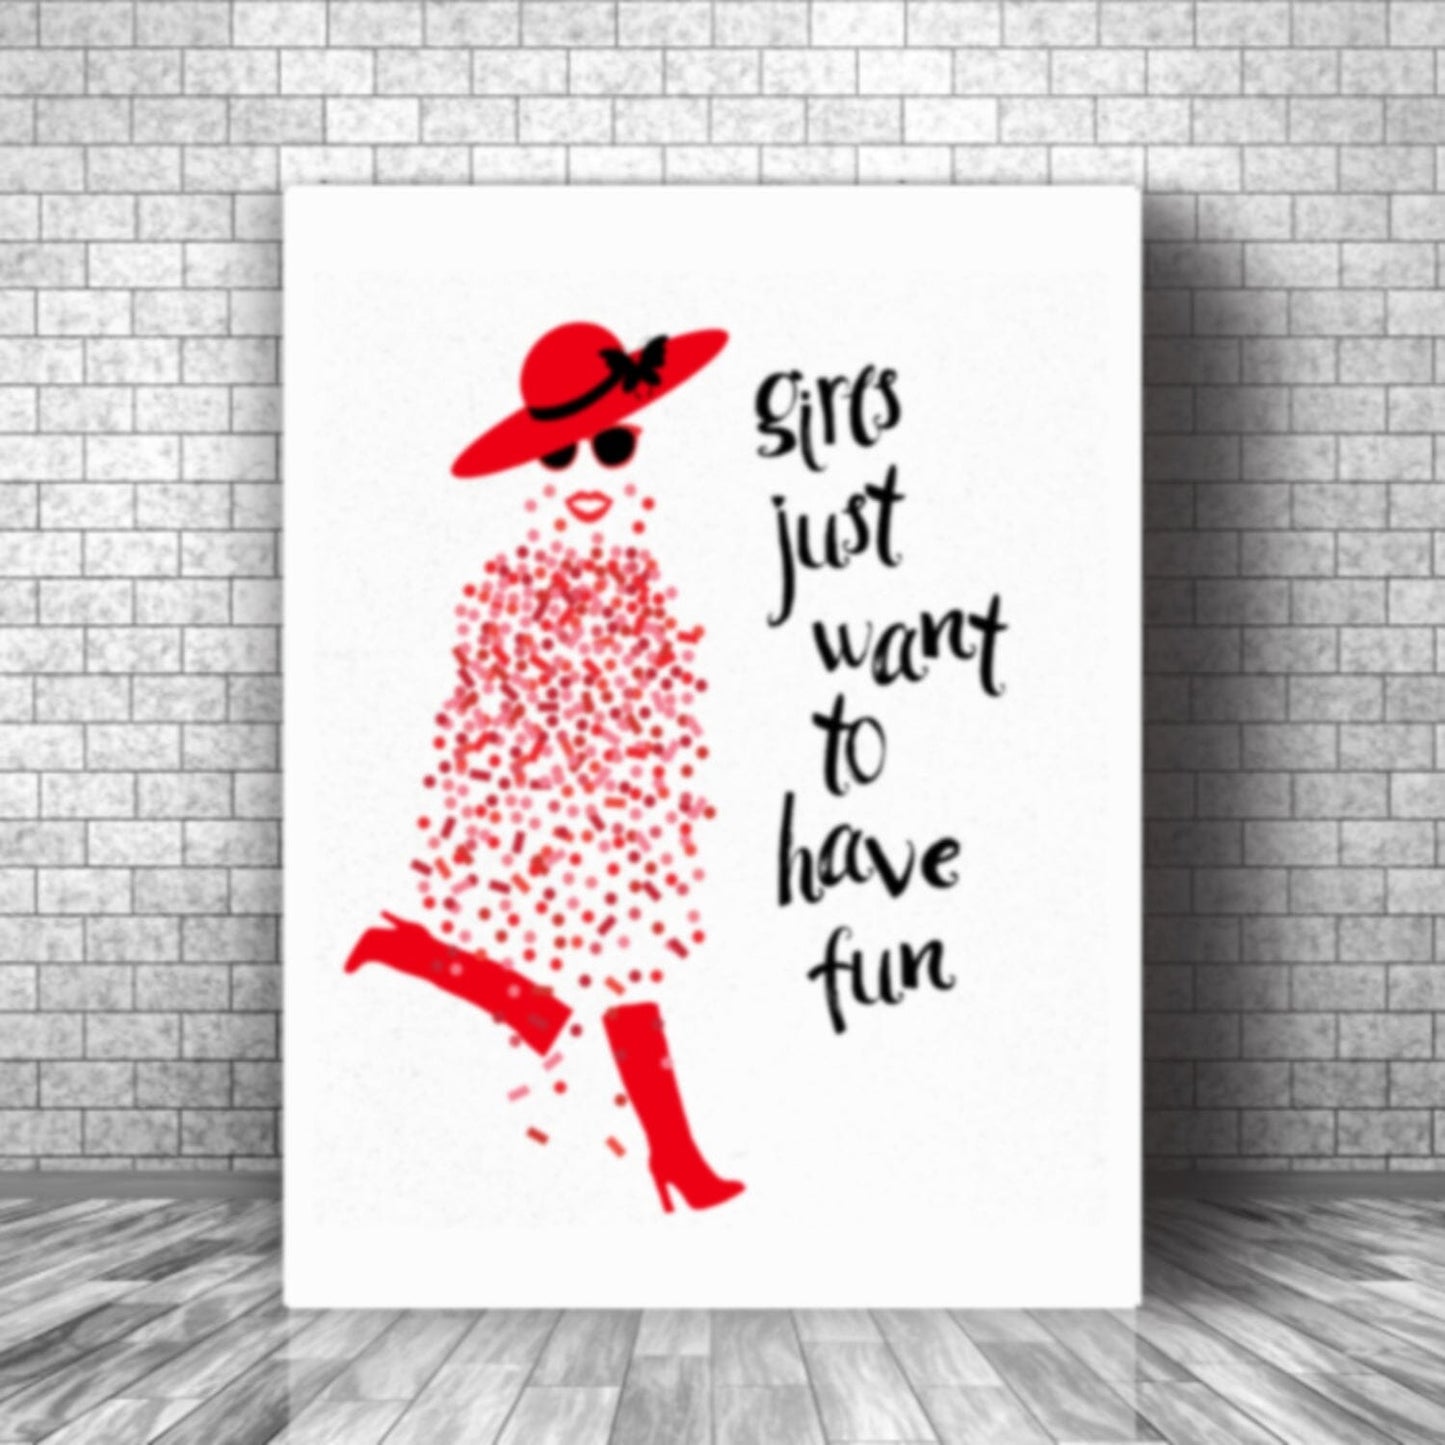 Girls Just Want to Have Fun by Cyndi Lauper - Lyric Inspired Art Song Lyrics Art Song Lyrics Art 11x14 Canvas Wrap 